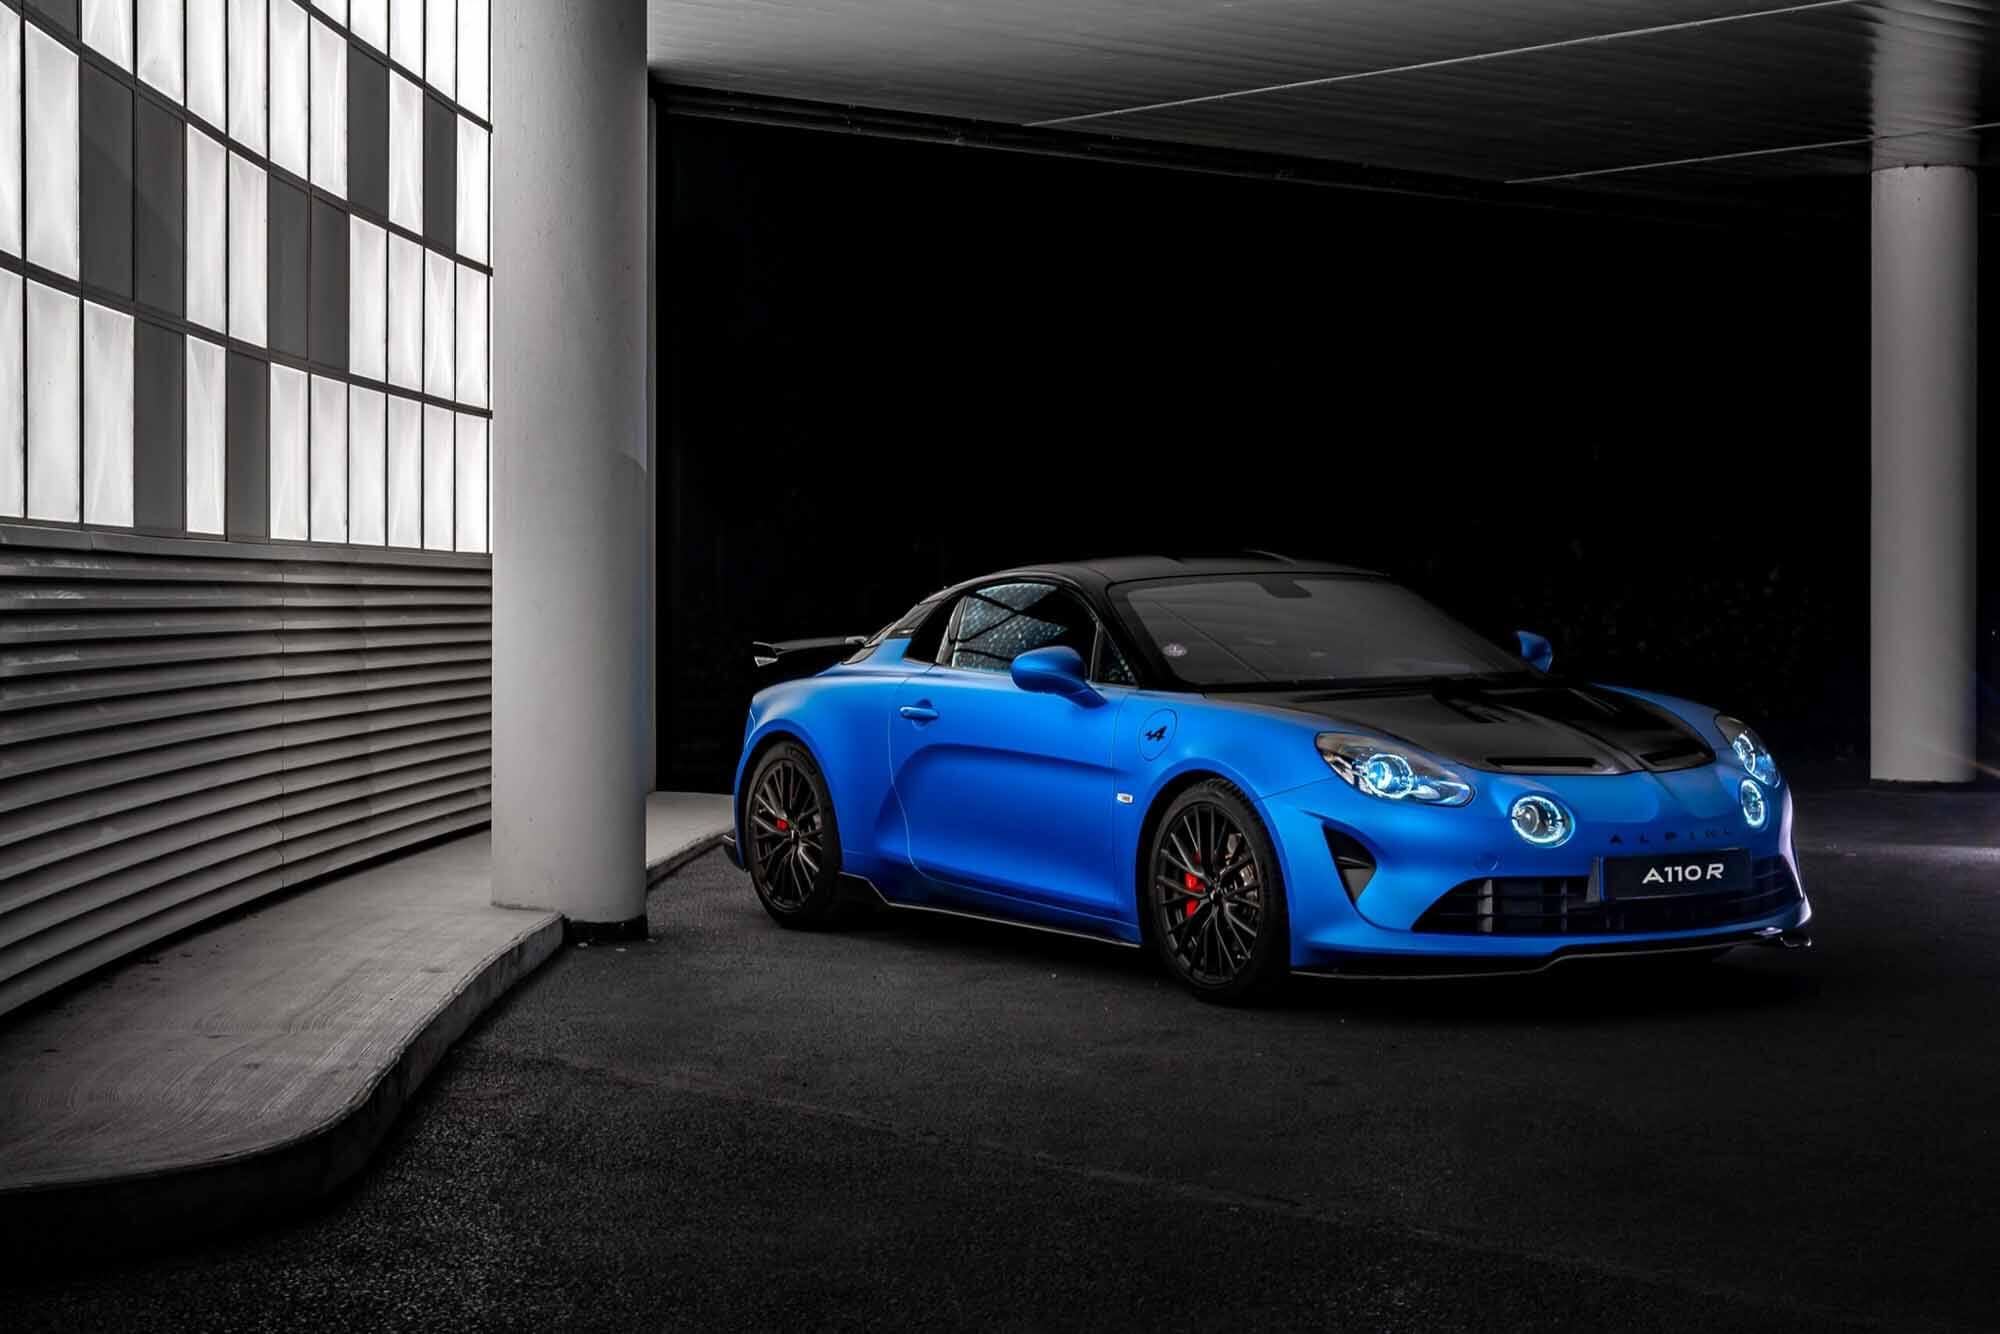 Alpine has released a special version of the A110 R sports car dedicated to the mountain pass